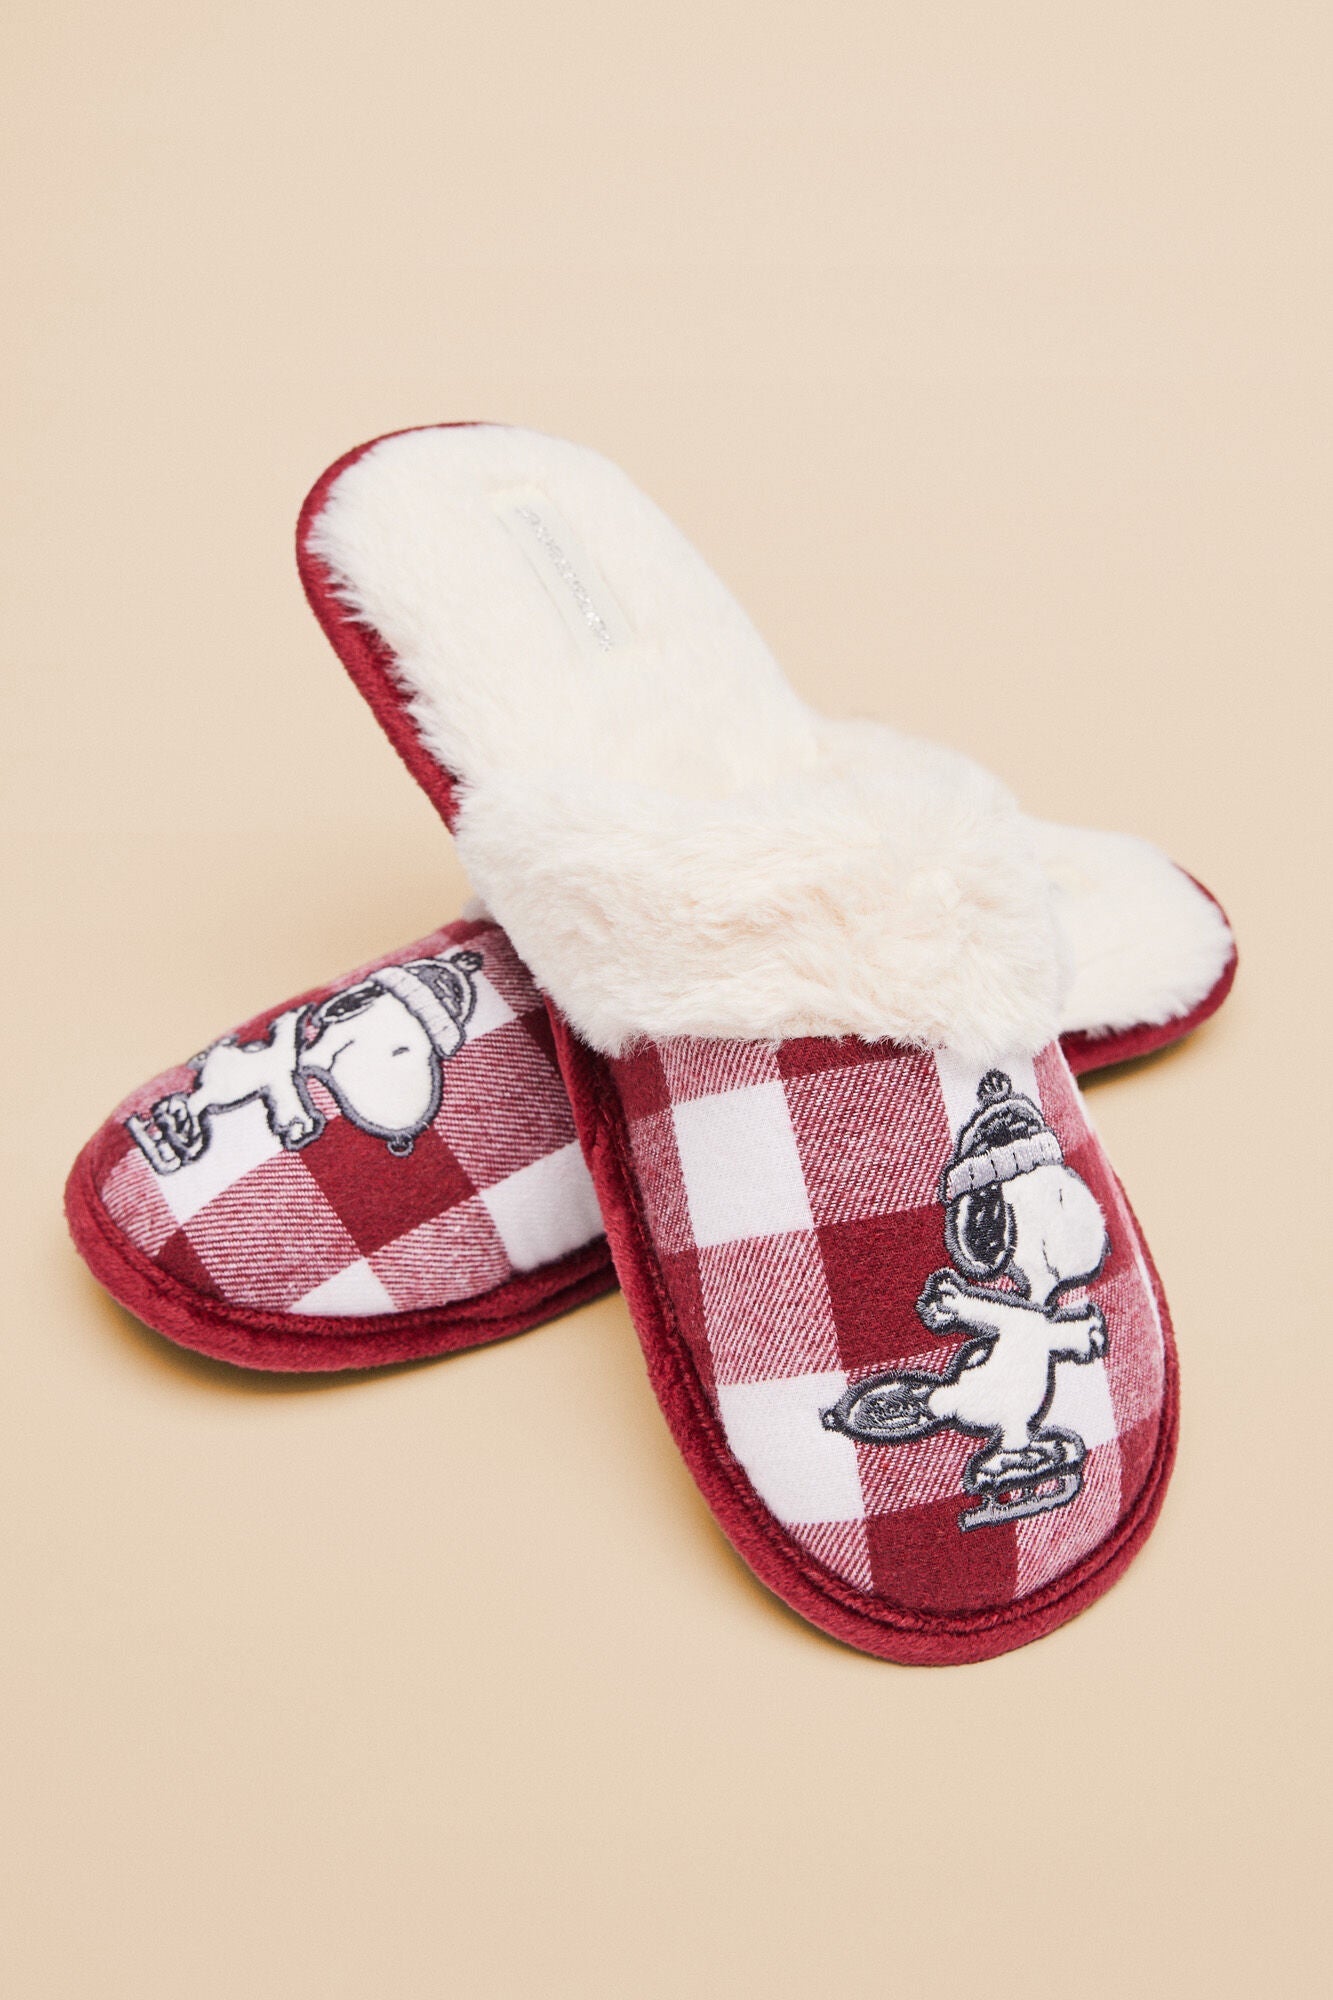 Snoopy slippers